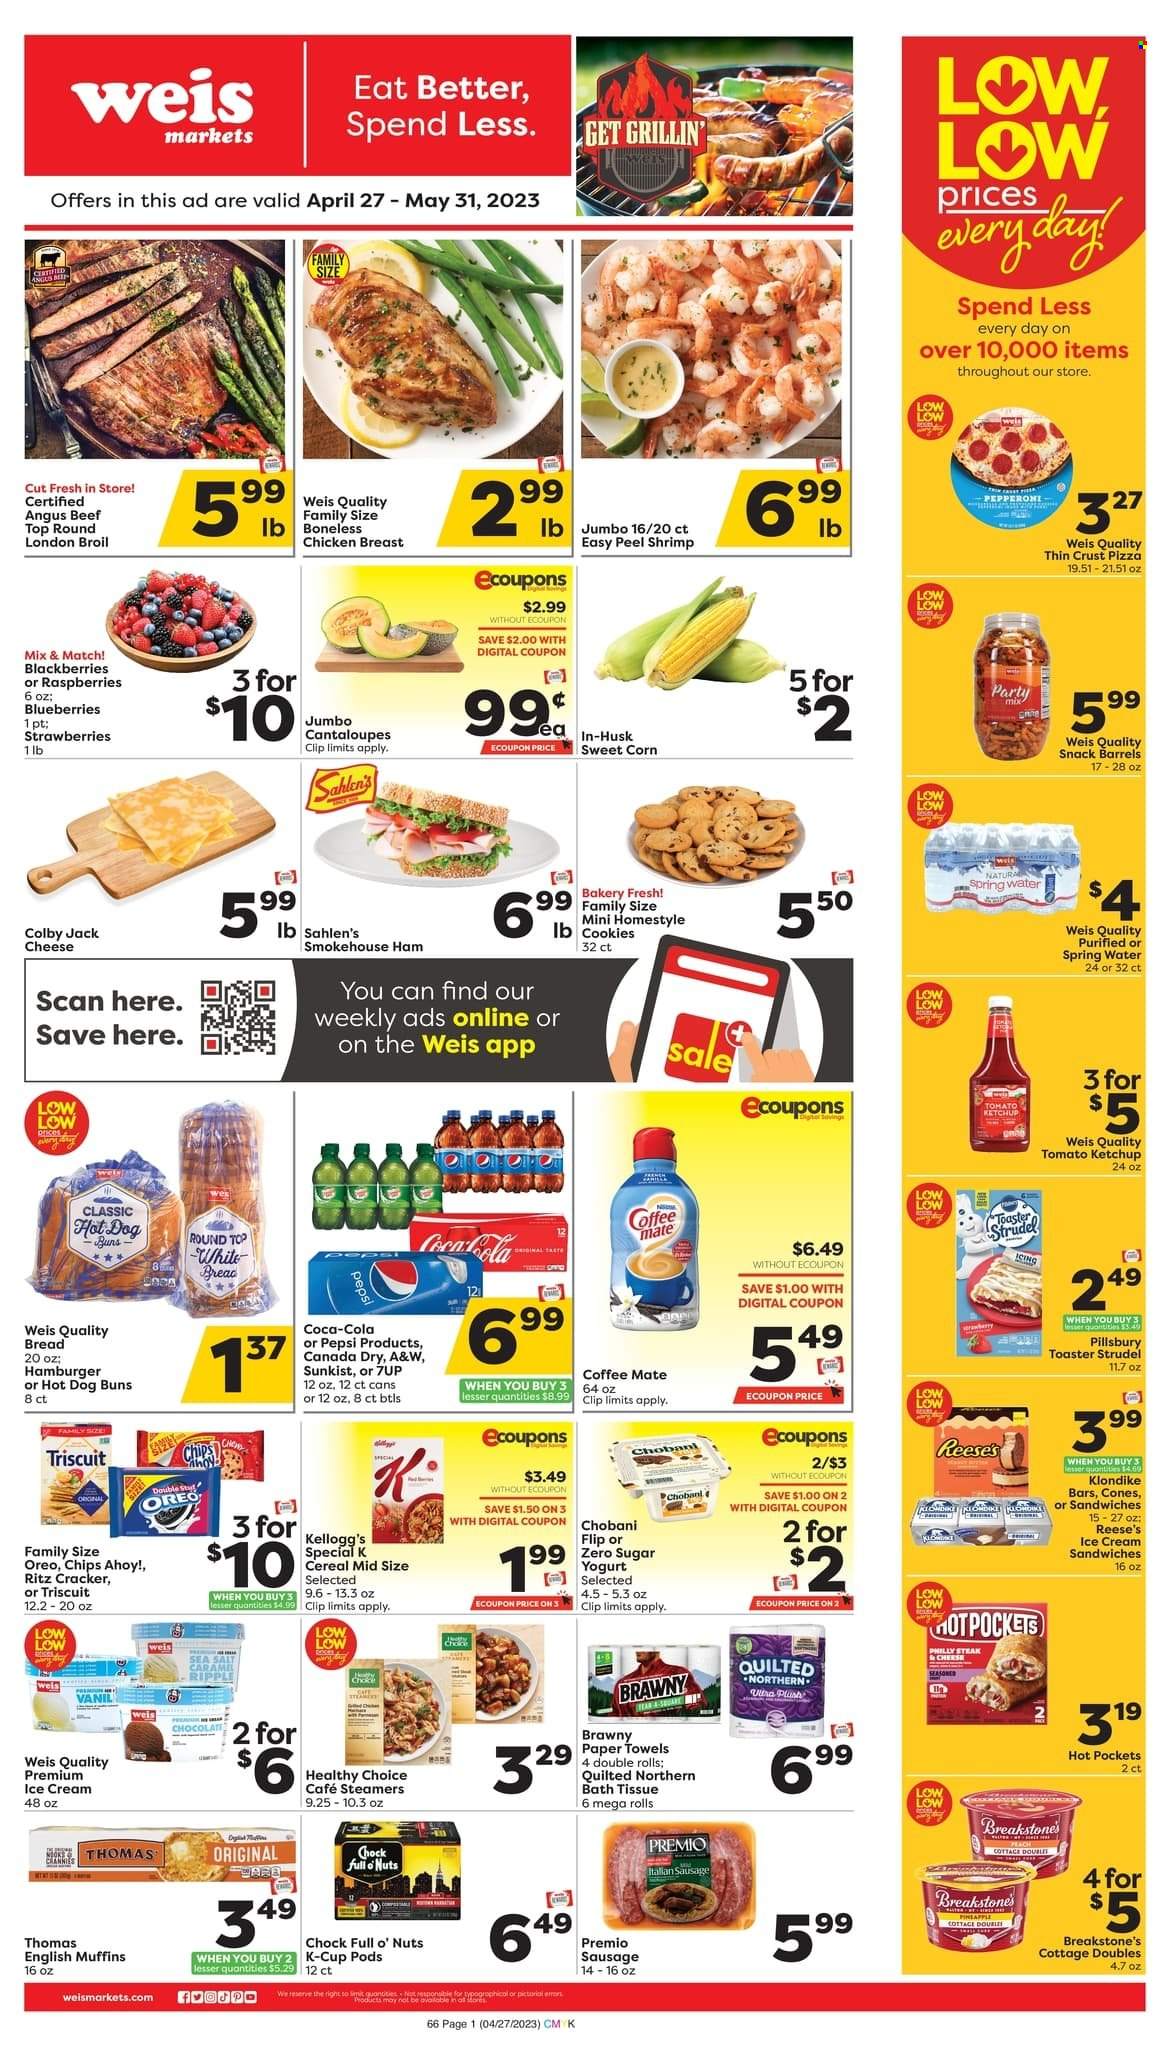 thumbnail - Weis Flyer - 04/27/2023 - 05/31/2023 - Sales products - bread, english muffins, strudel, buns, cantaloupe, corn, sweet corn, blackberries, blueberries, raspberries, strawberries, chicken breasts, chicken, beef meat, shrimps, hot pocket, pizza, Pillsbury, Healthy Choice, ham, smoked ham, sausage, pepperoni, italian sausage, Colby cheese, Oreo, yoghurt, Chobani, Coffee-Mate, ice cream, ice cream sandwich, Reese's, cookies, snack, crackers, Kellogg's, Chips Ahoy!, RITZ, chips, cereals, ketchup, Coca-Cola, Pepsi, 7UP, spring water, water, coffee capsules, K-Cups, bath tissue, Quilted Northern, kitchen towels, paper towels. Page 1.